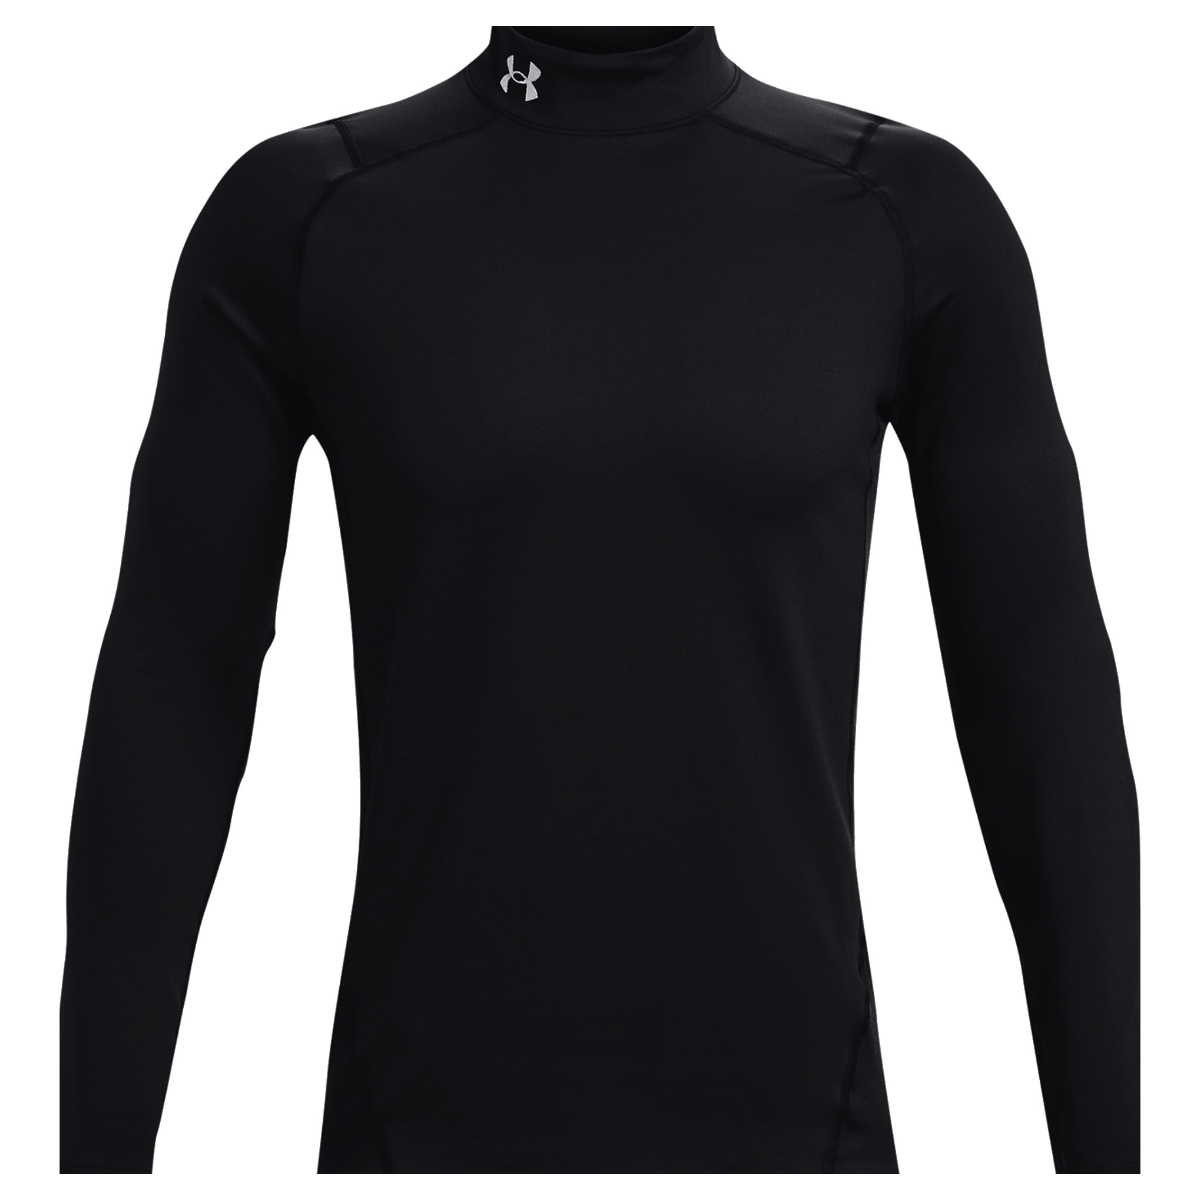 Under Armour Cold Gear Armour Fitted Mock Black/White